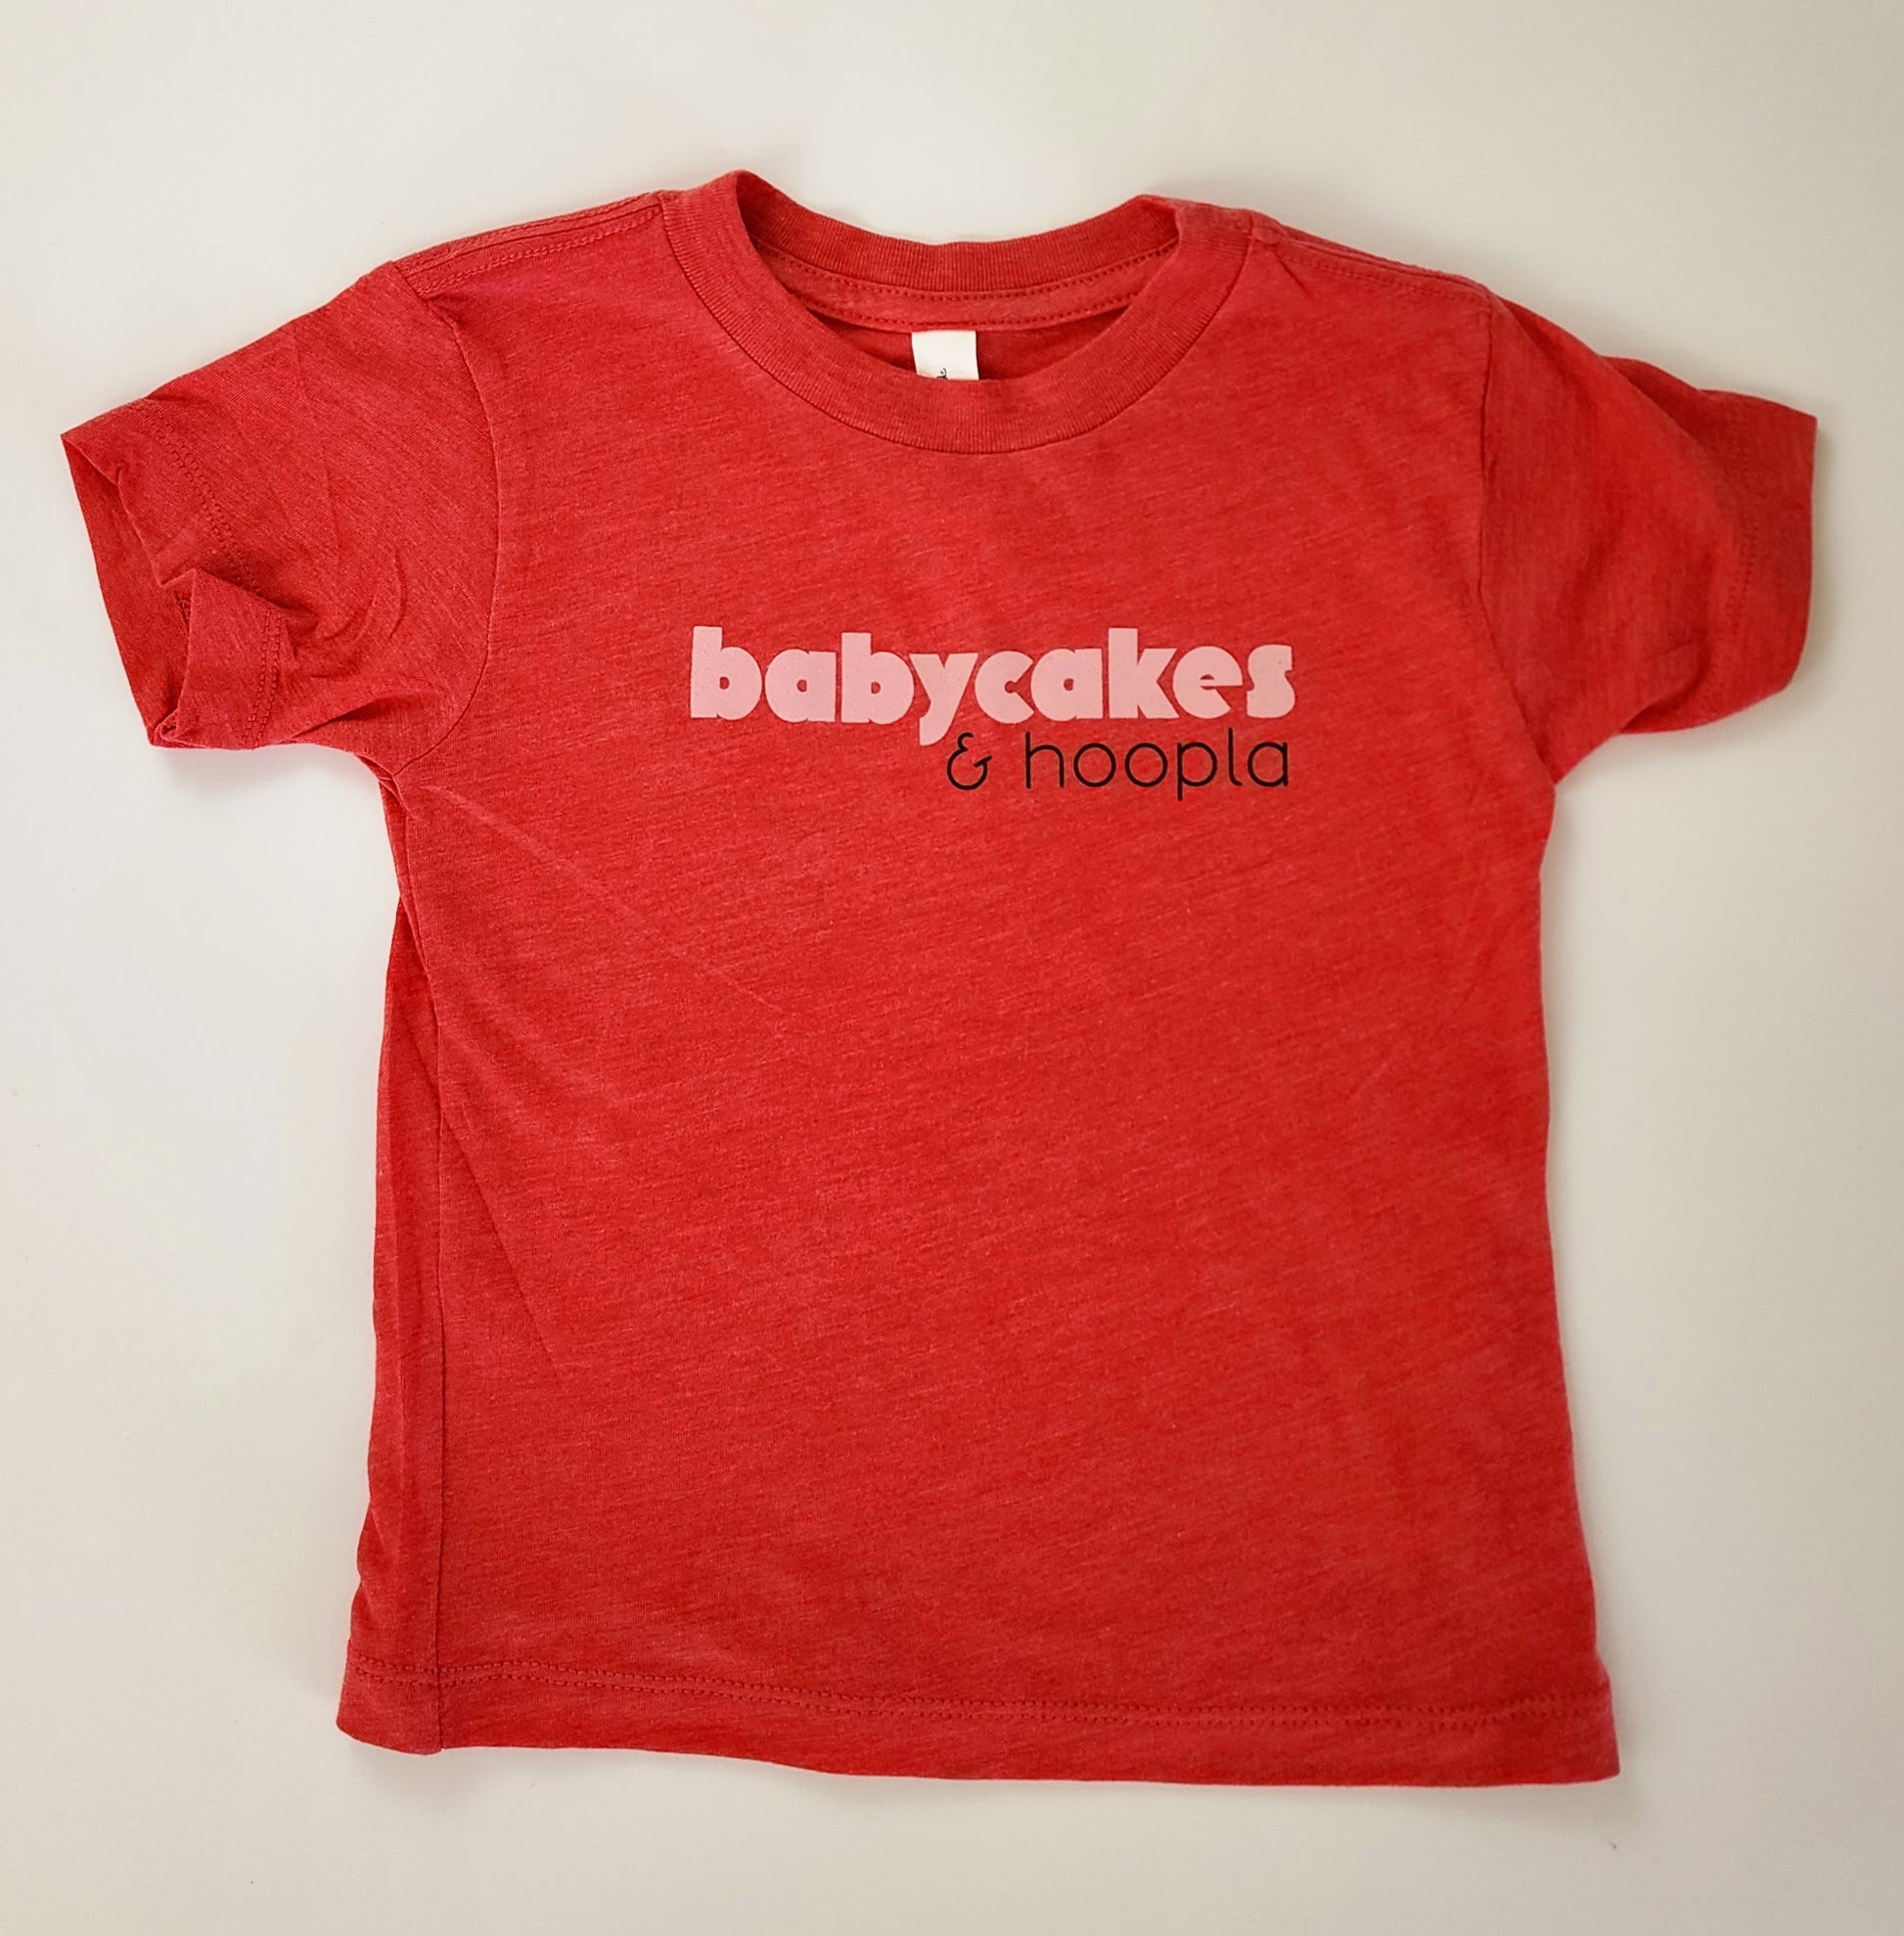 A red t-shirt with a soft, heathered look is spread out on a white background. The front of the shirt reads "babycakes" in a bold, light pink font. Beneath "babycakes" and to the right is "& hoopla" in a thinner black writing.